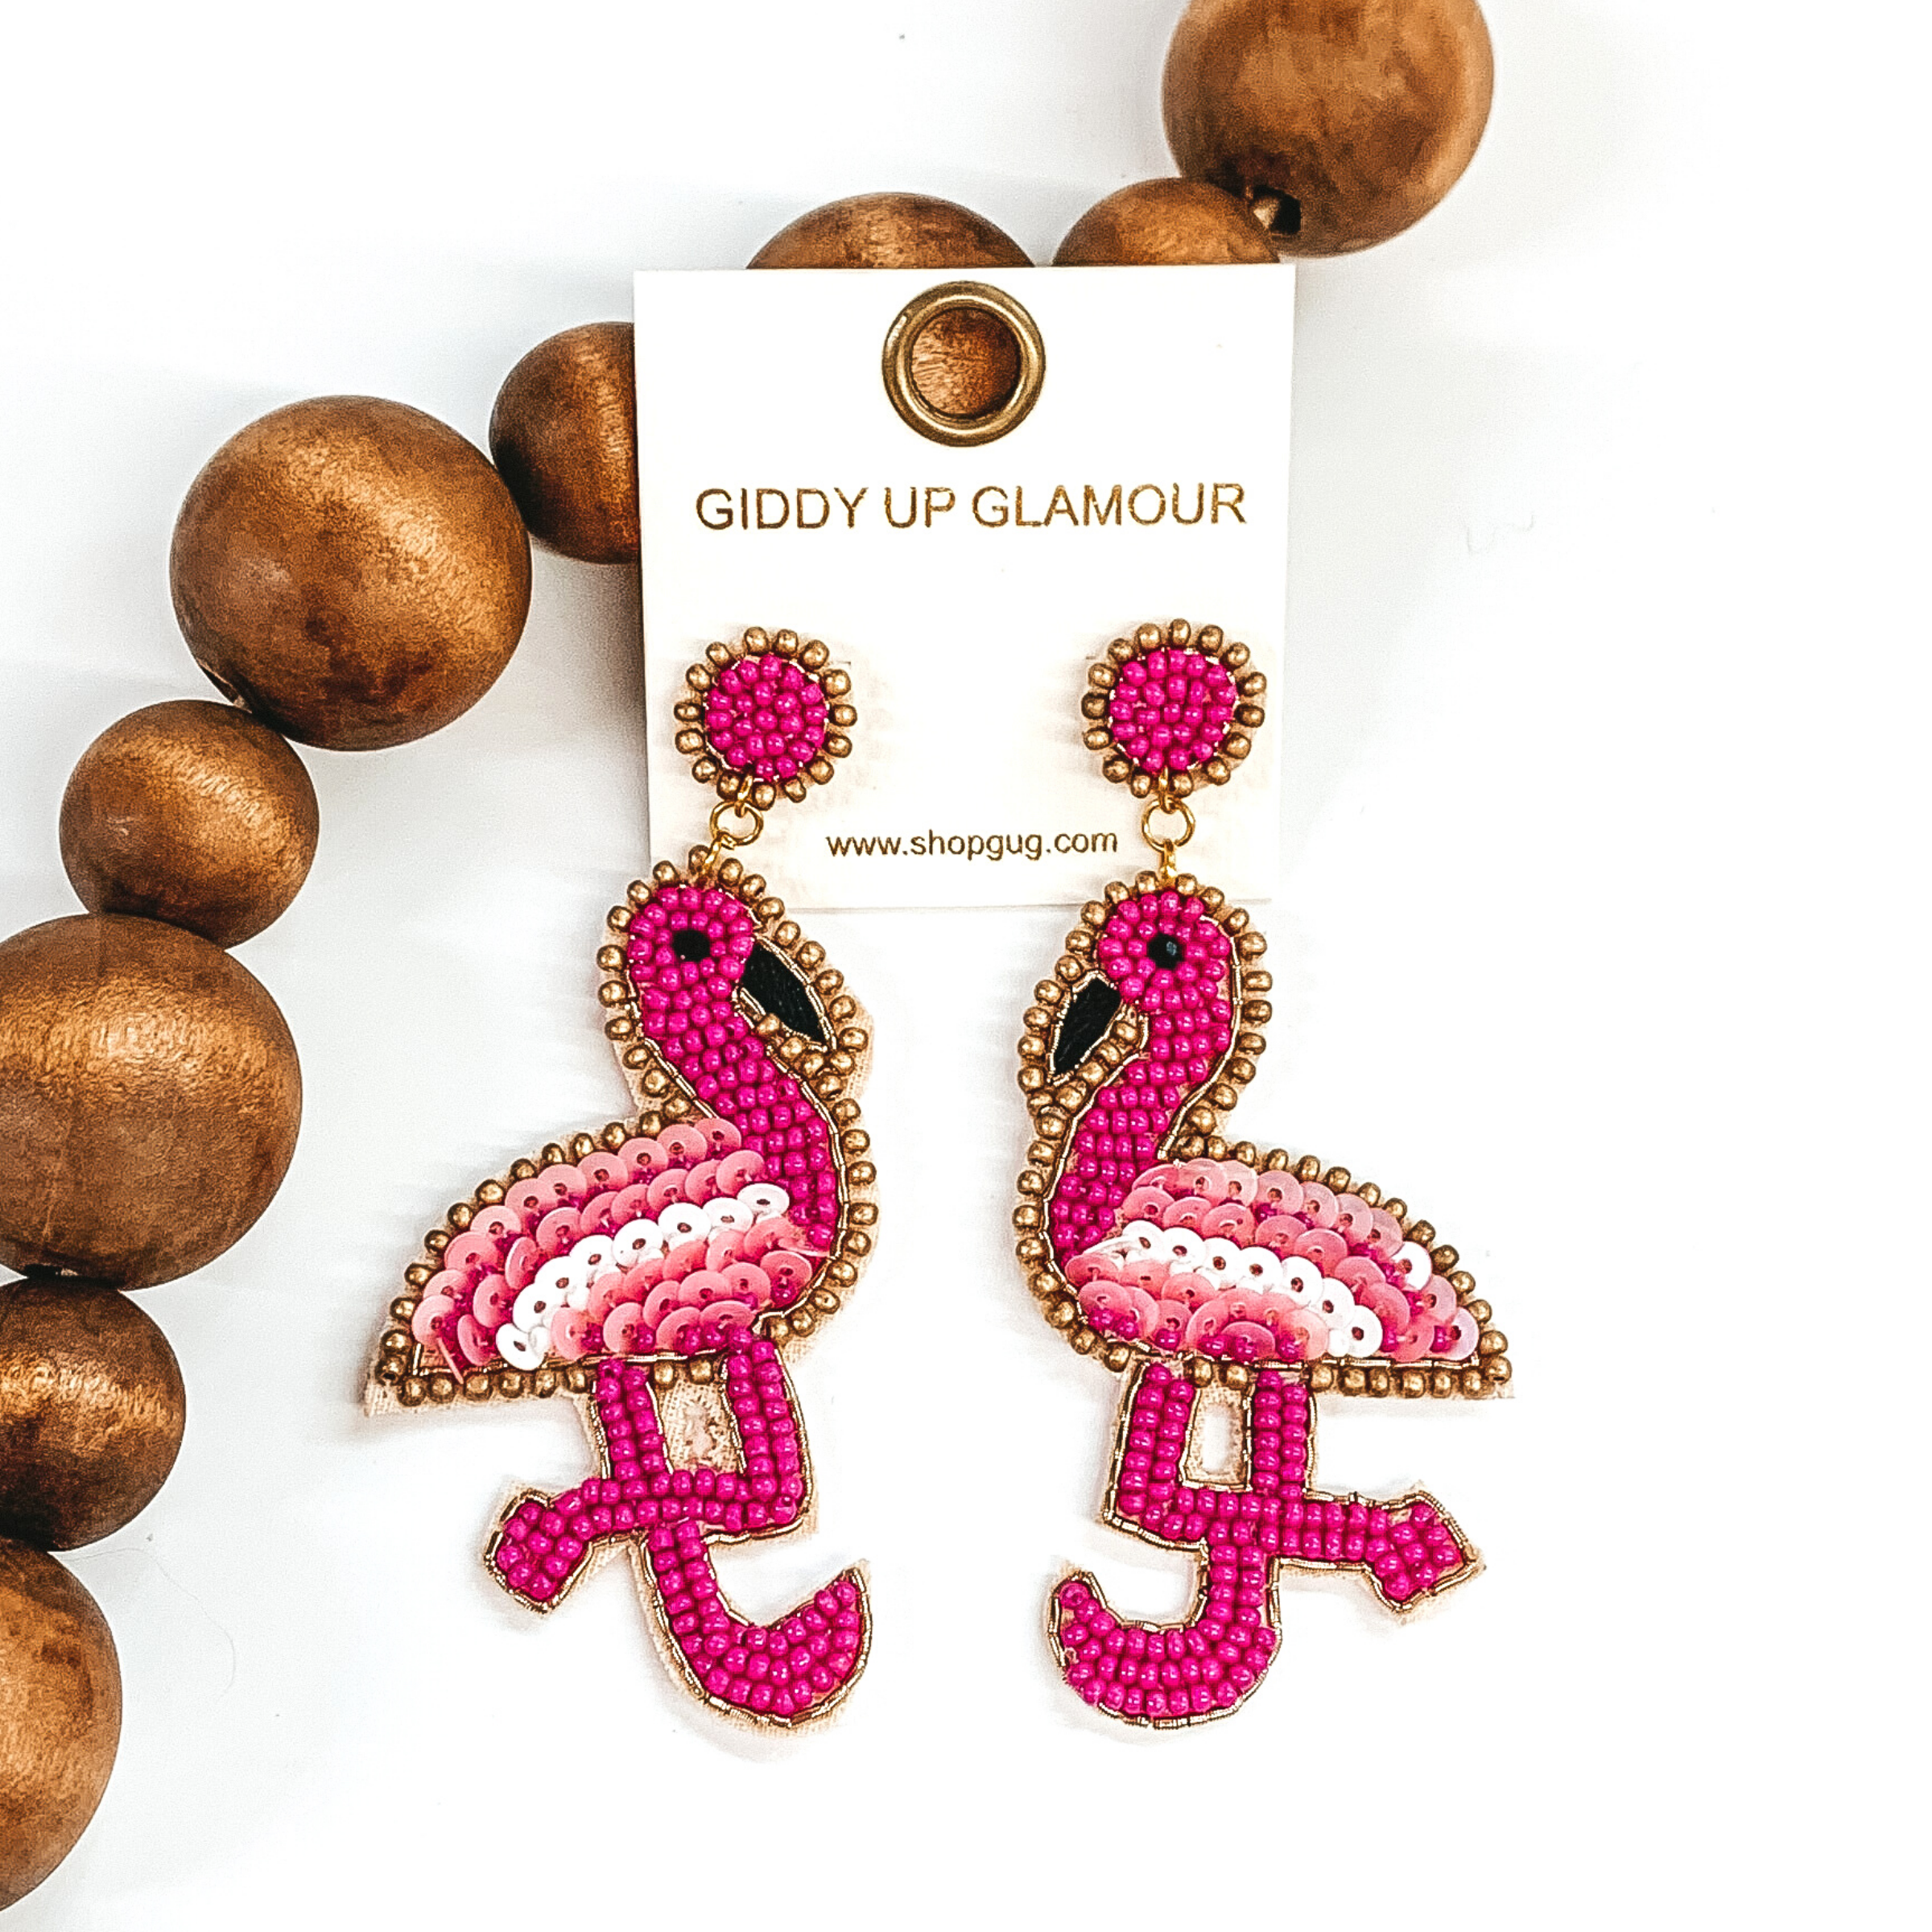 These earrings include circle studs with fuchsia beads and a gold outline. Hanging from the bottom of these studs is a flamingo shaped beaded pendant. These earrings are pictured leaning agasint dark brown beads on a white background. 